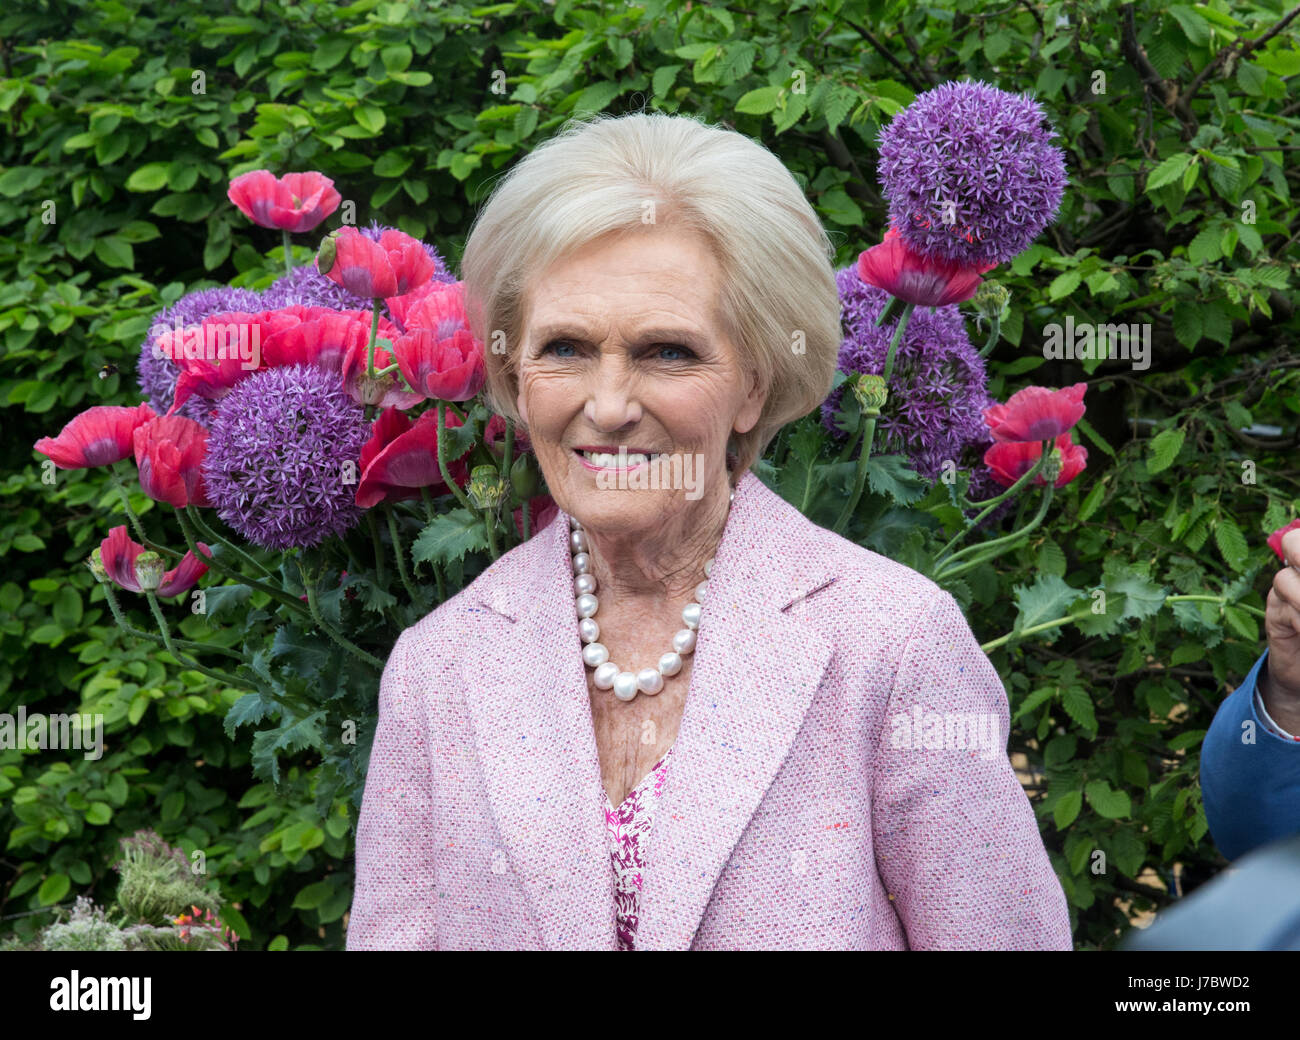 Cook and TV celebrity, Mary Berry, at the RHS Chelsea Flower Show 2017 Stock Photo